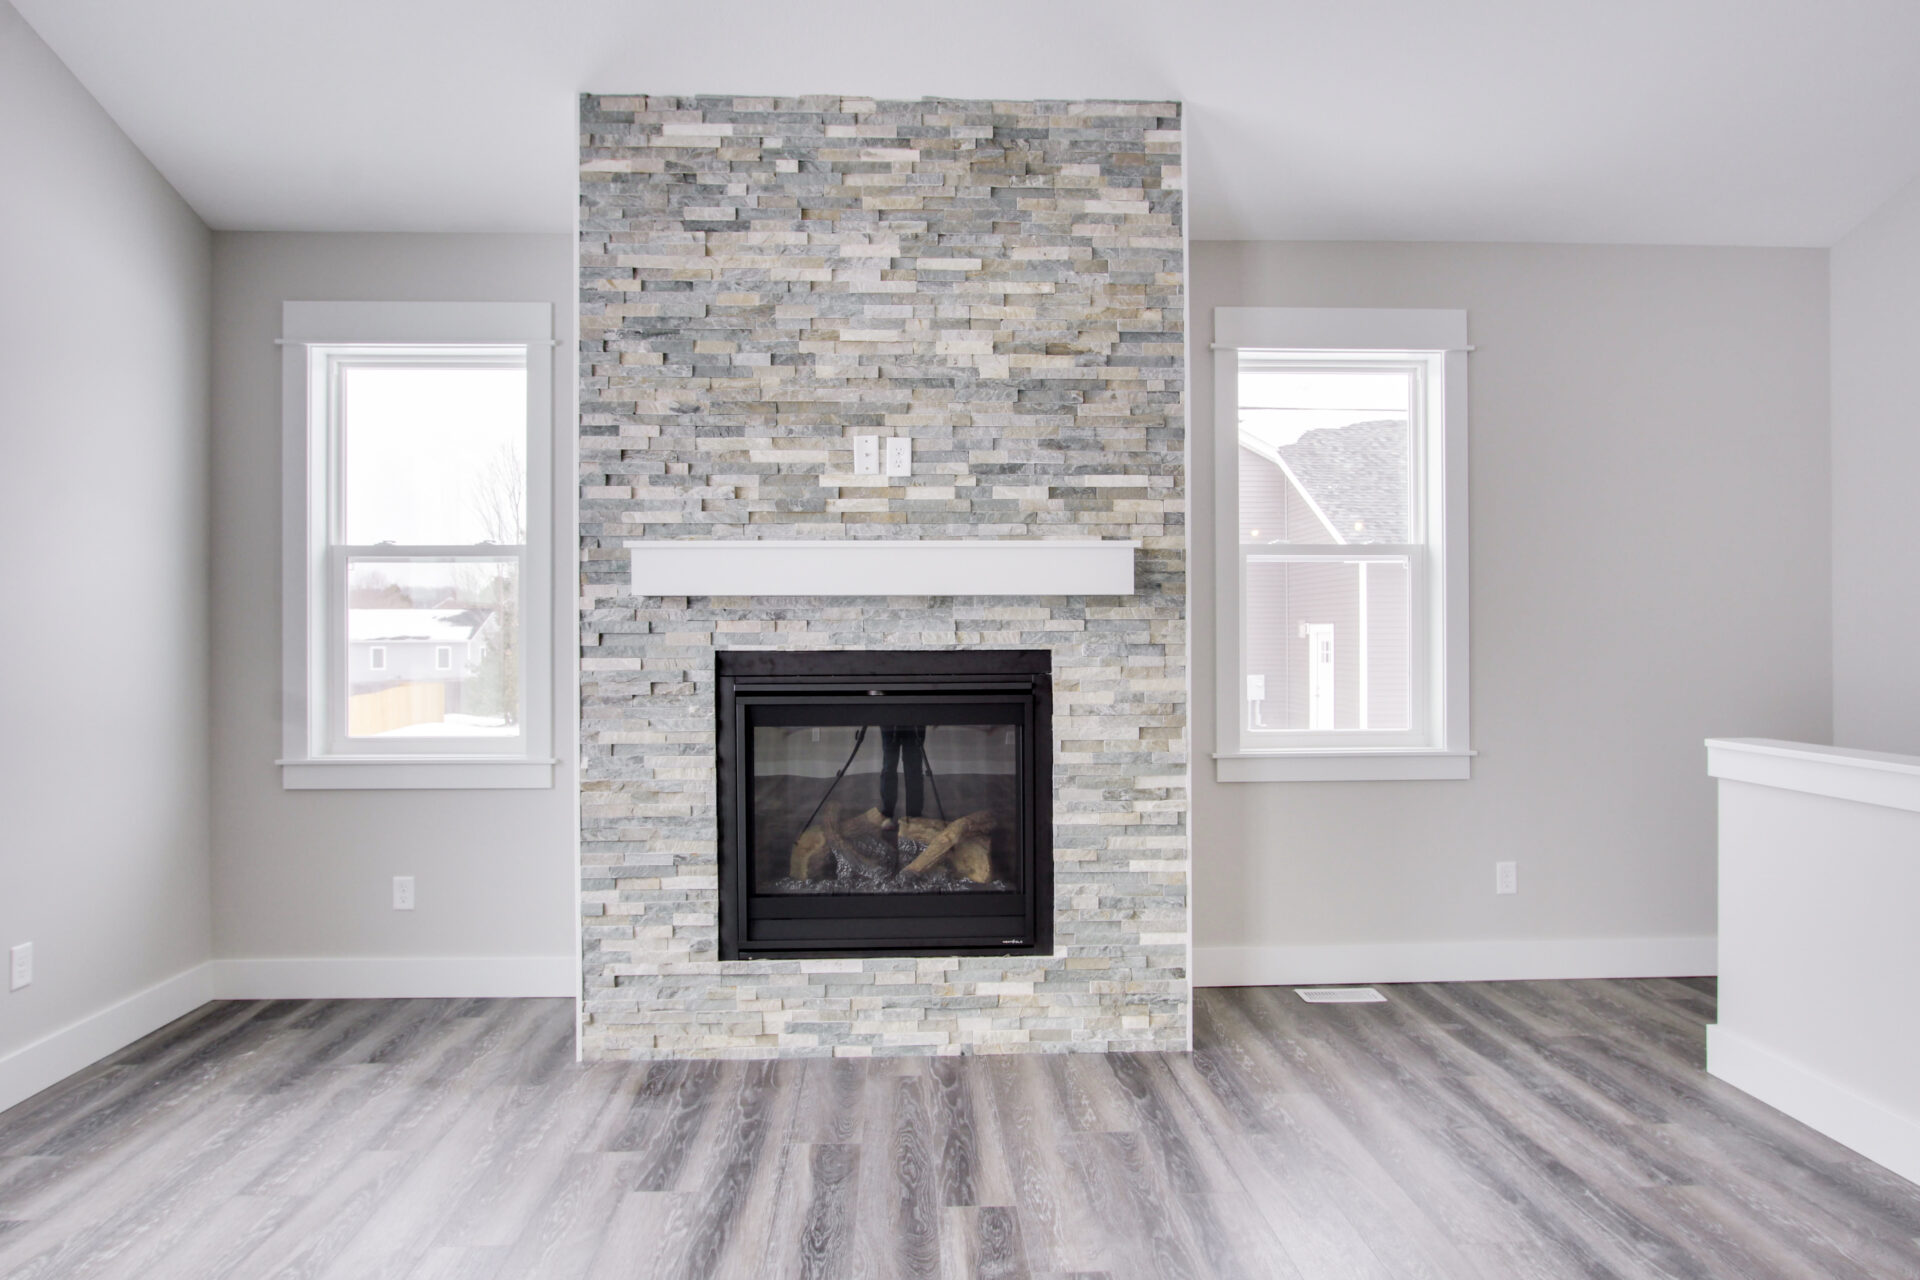 Empty living room with a fireplace, white walls and hardwood floor